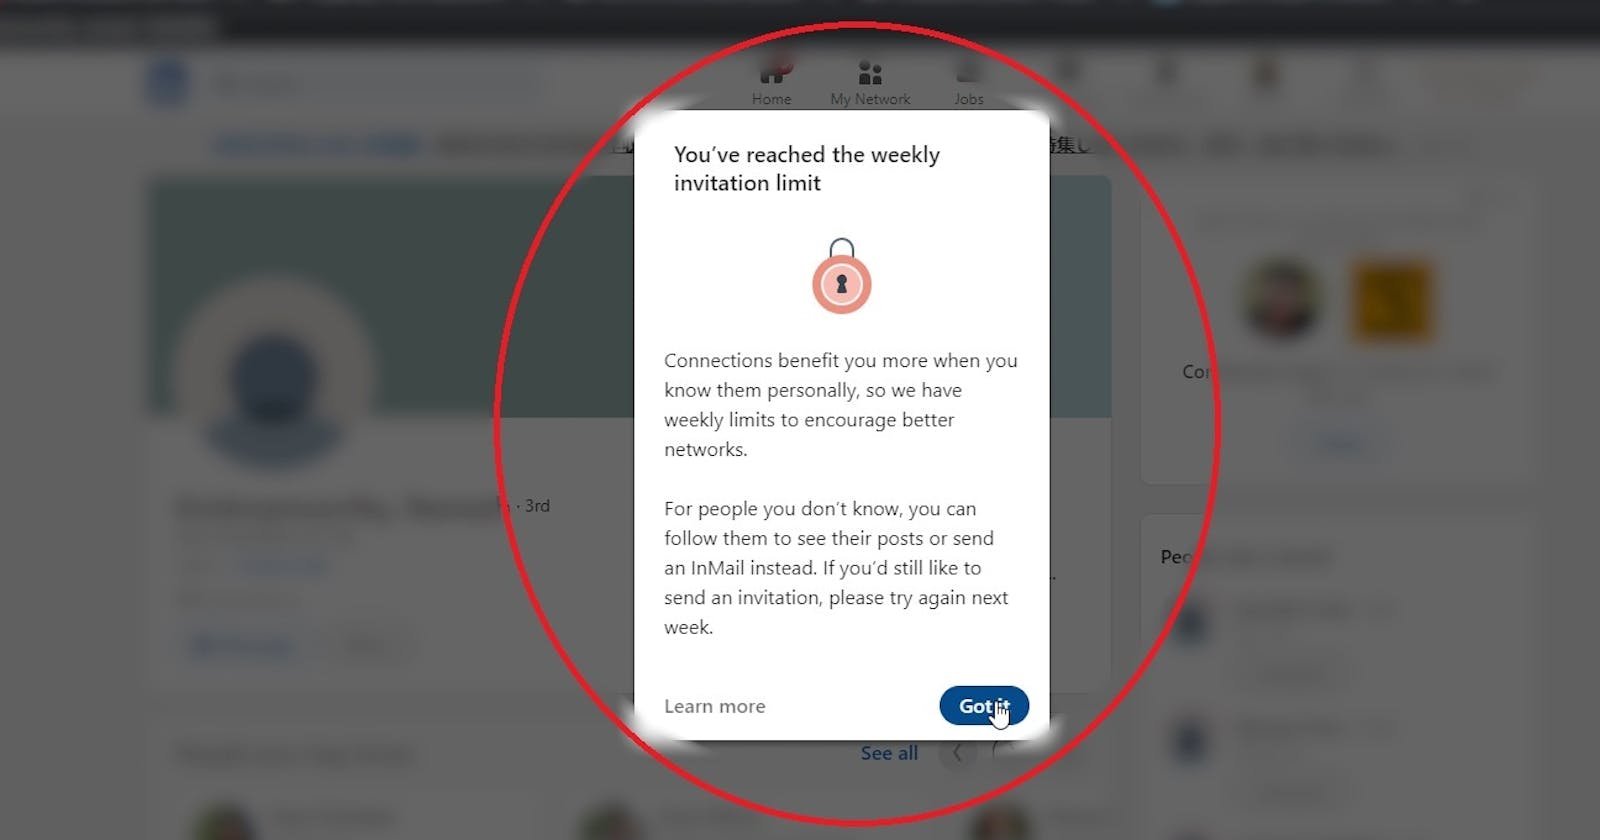 Bug Report; Bypassing Weekly Limits In Basic (Free) LinkedIn Account